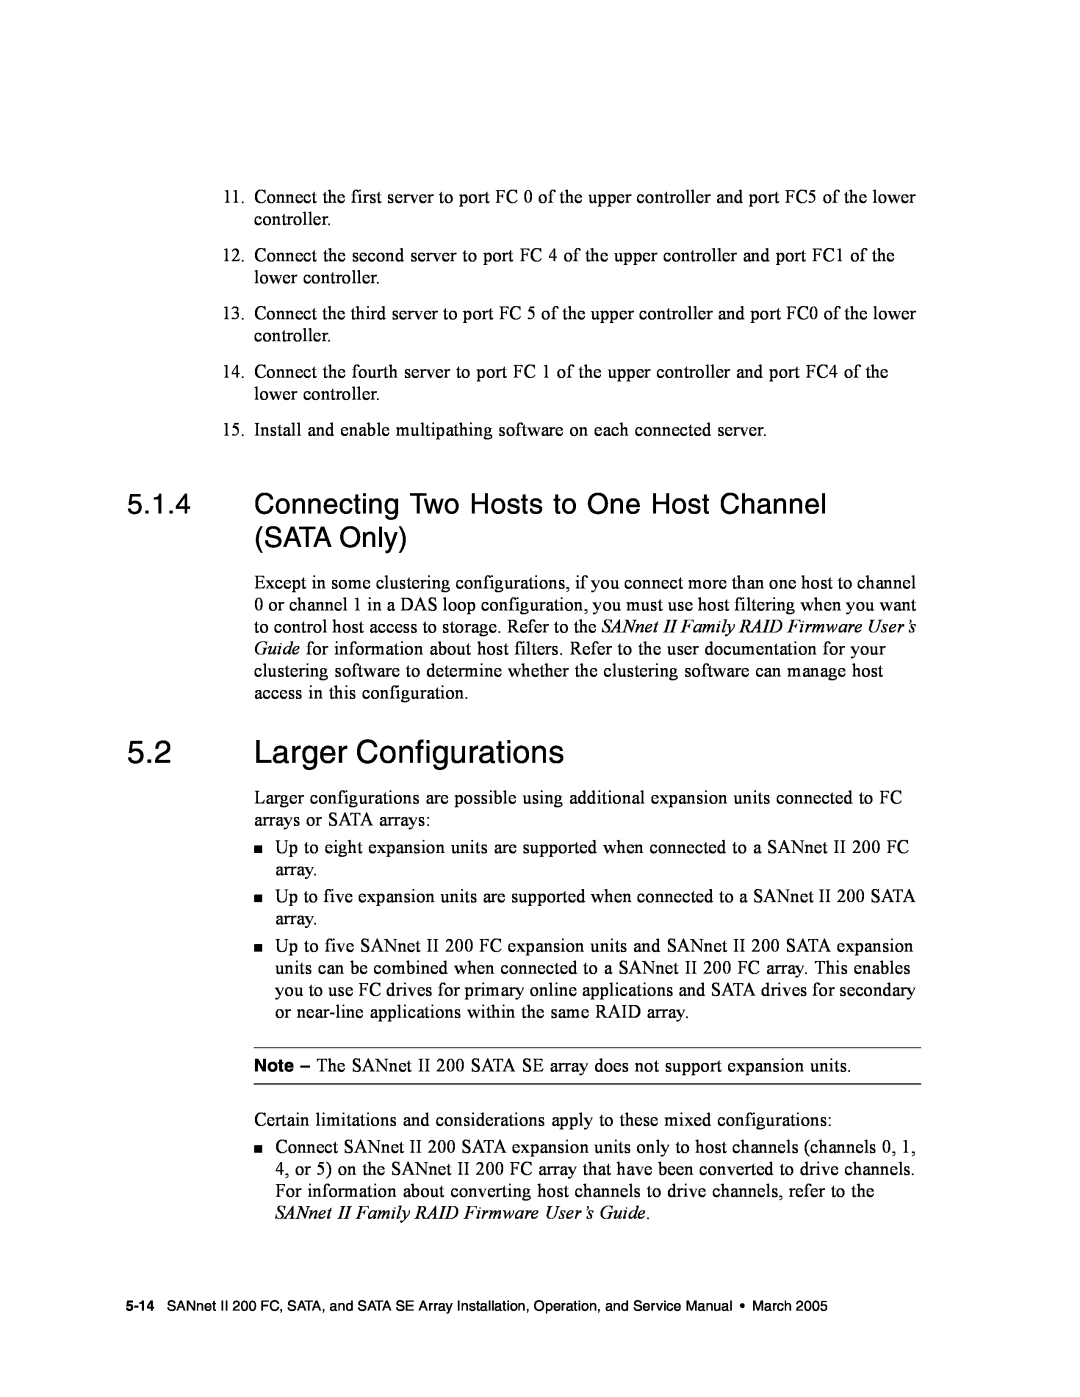 Dot Hill Systems II 200 FC service manual Larger Configurations, Connecting Two Hosts to One Host Channel SATA Only 